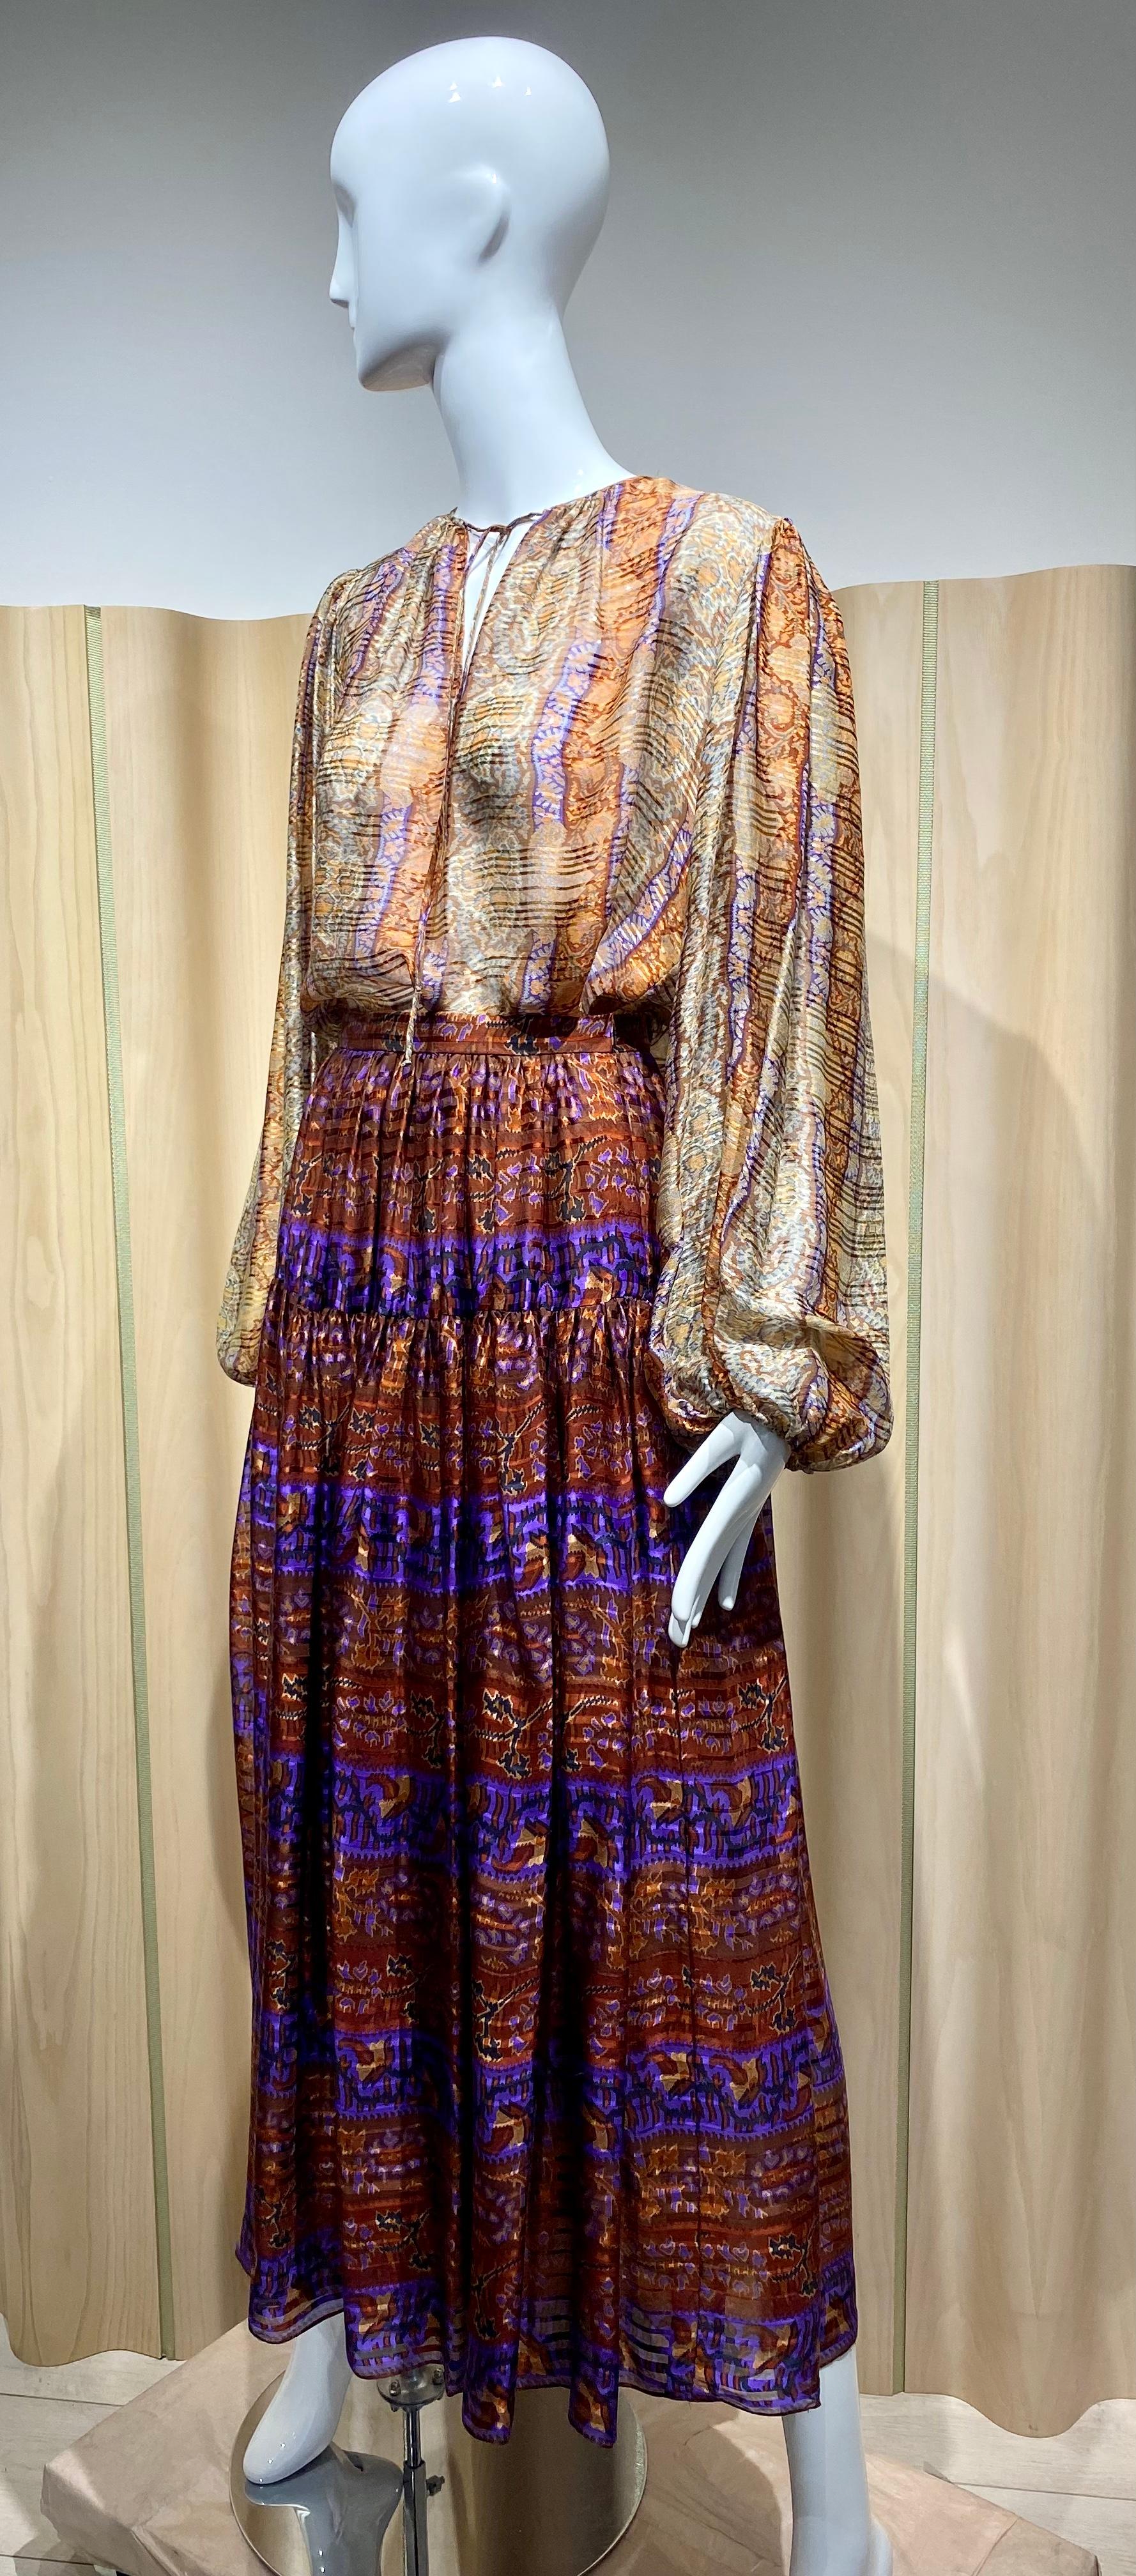 1970s Oscar de la renta brown, creme, gold and purple multi color paisley print peasant long sleeve blouse and skirt set.
Blouse fit size Large 
Bust: 44” / Waist: 44” / Shoulder: 16”/ Sleeves: 25”
Skirt fit size small: Waist: 25” / Skirt Length: 38”